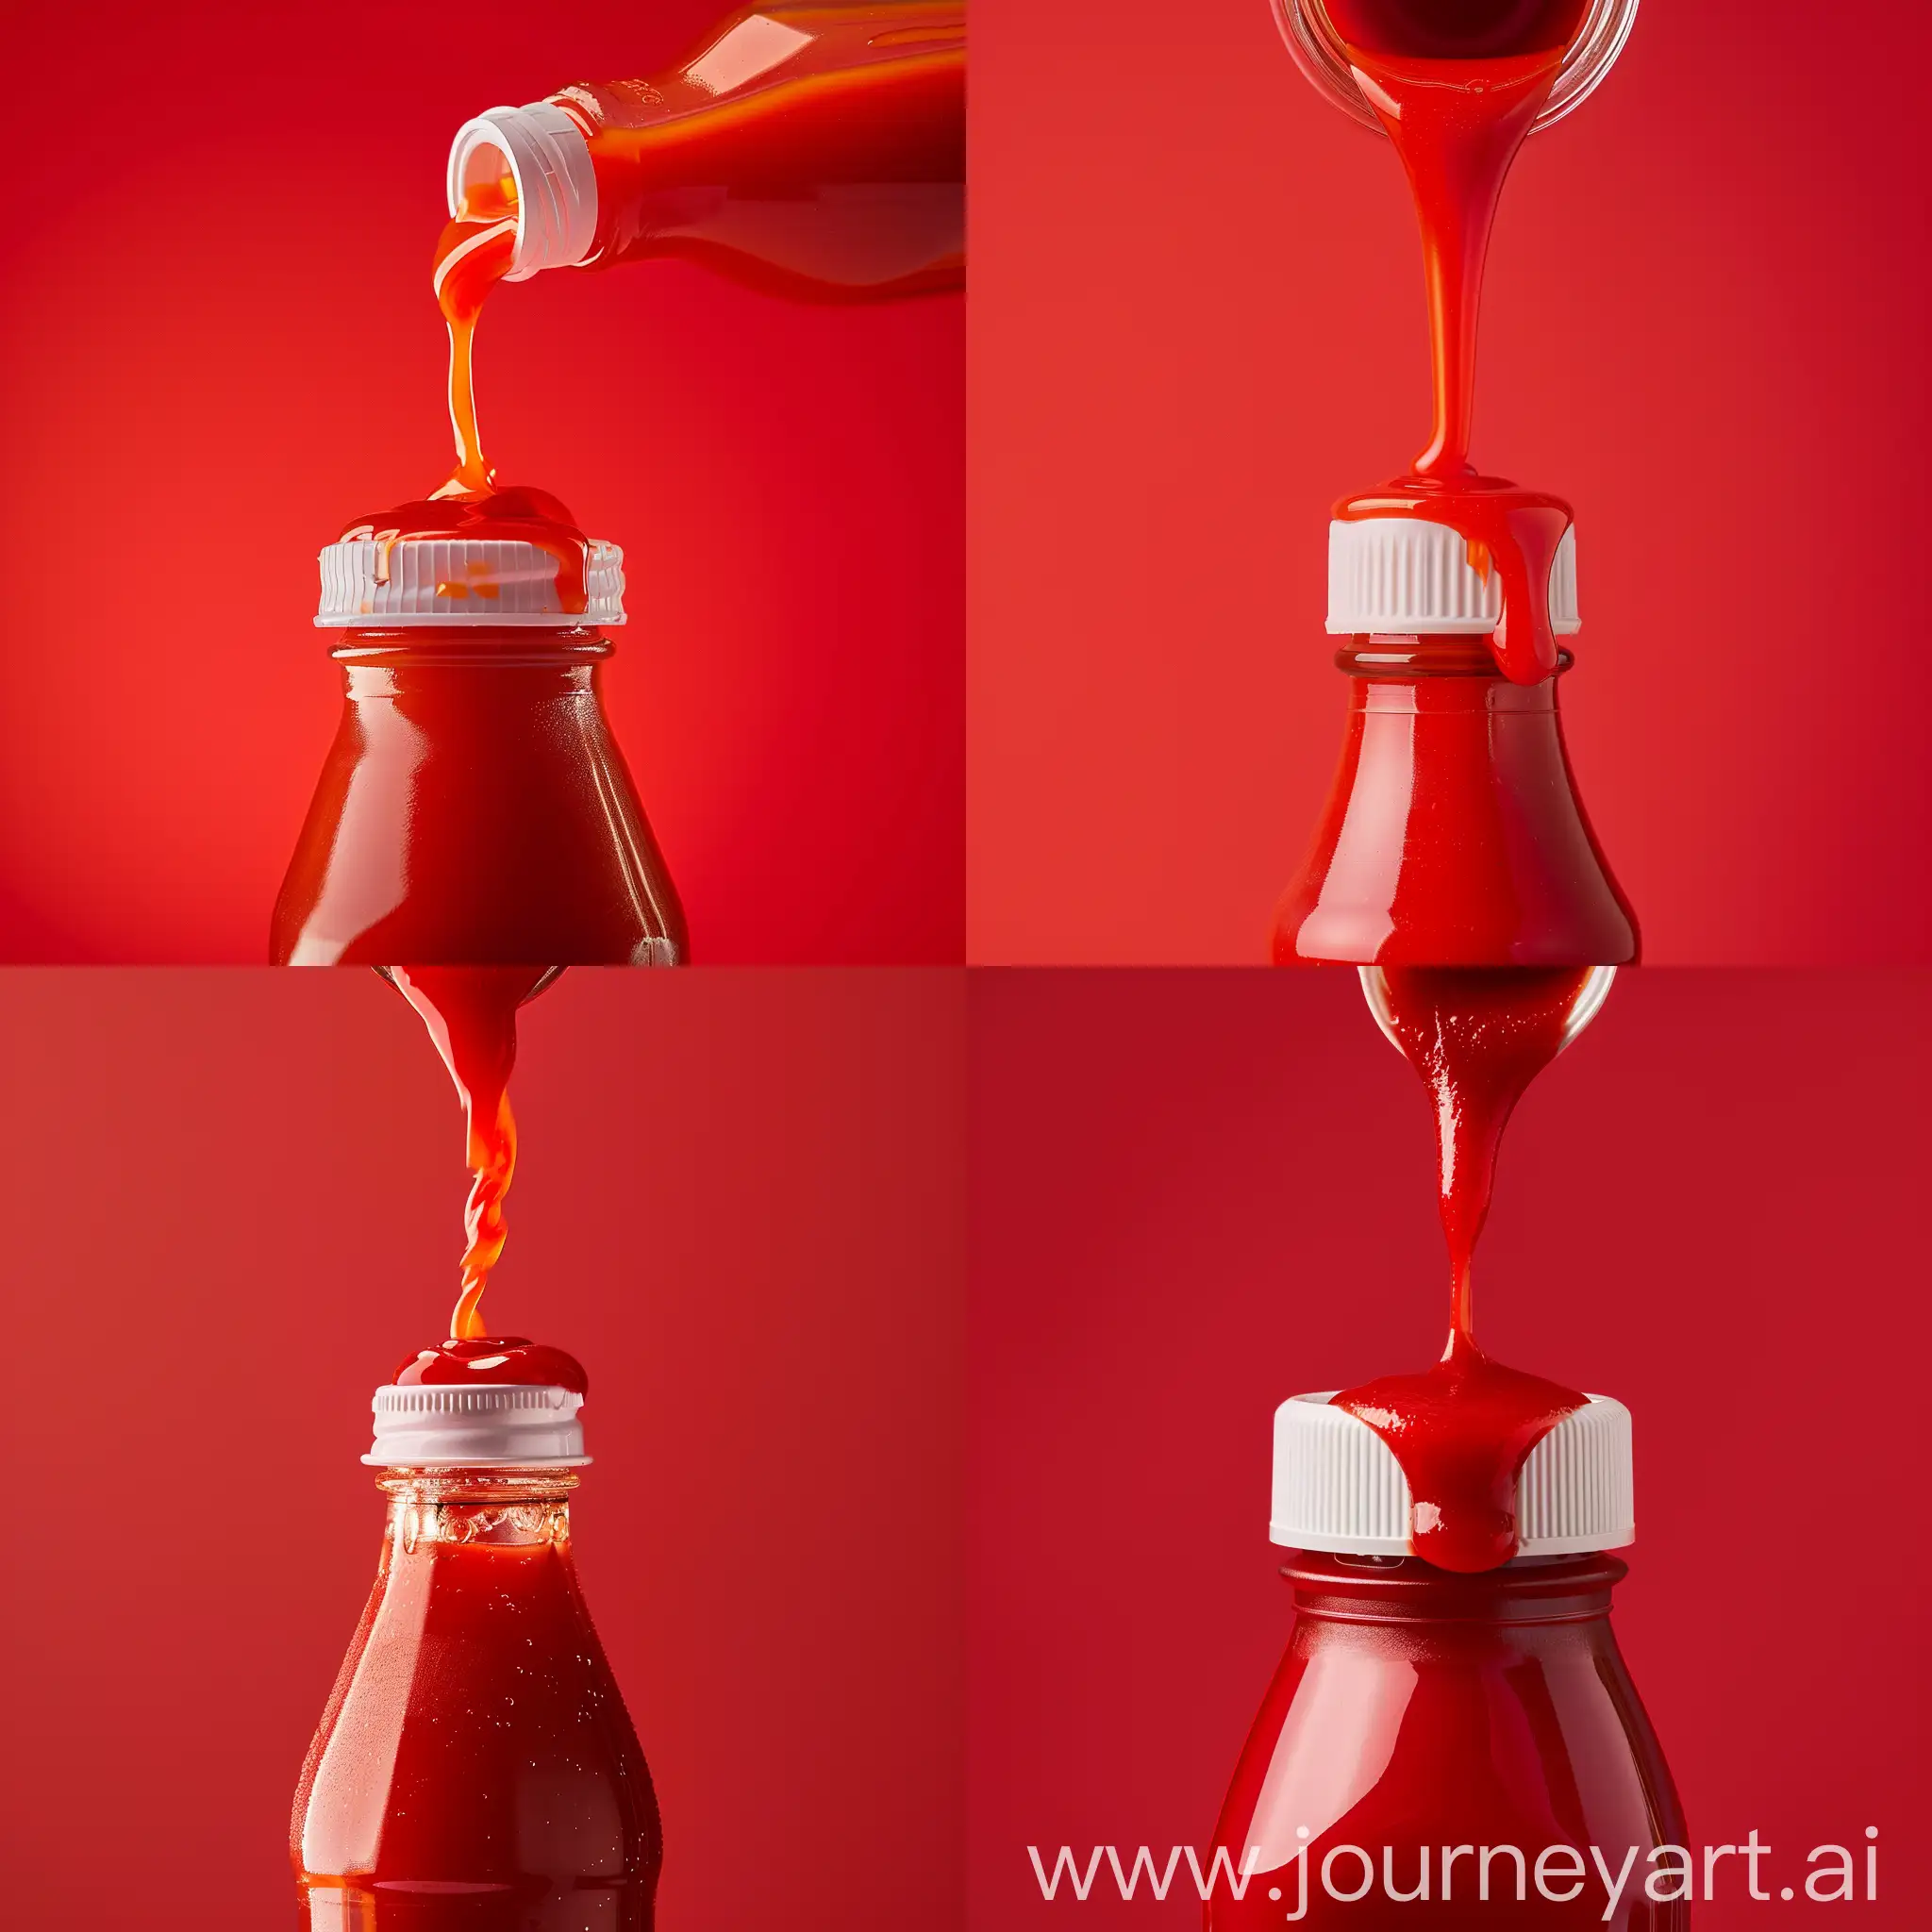 Tomato ketchup is squeezed from a red bottle with white lid. Stock footage. Close up of pouring tomato sauce from the bottle isolated on red background.